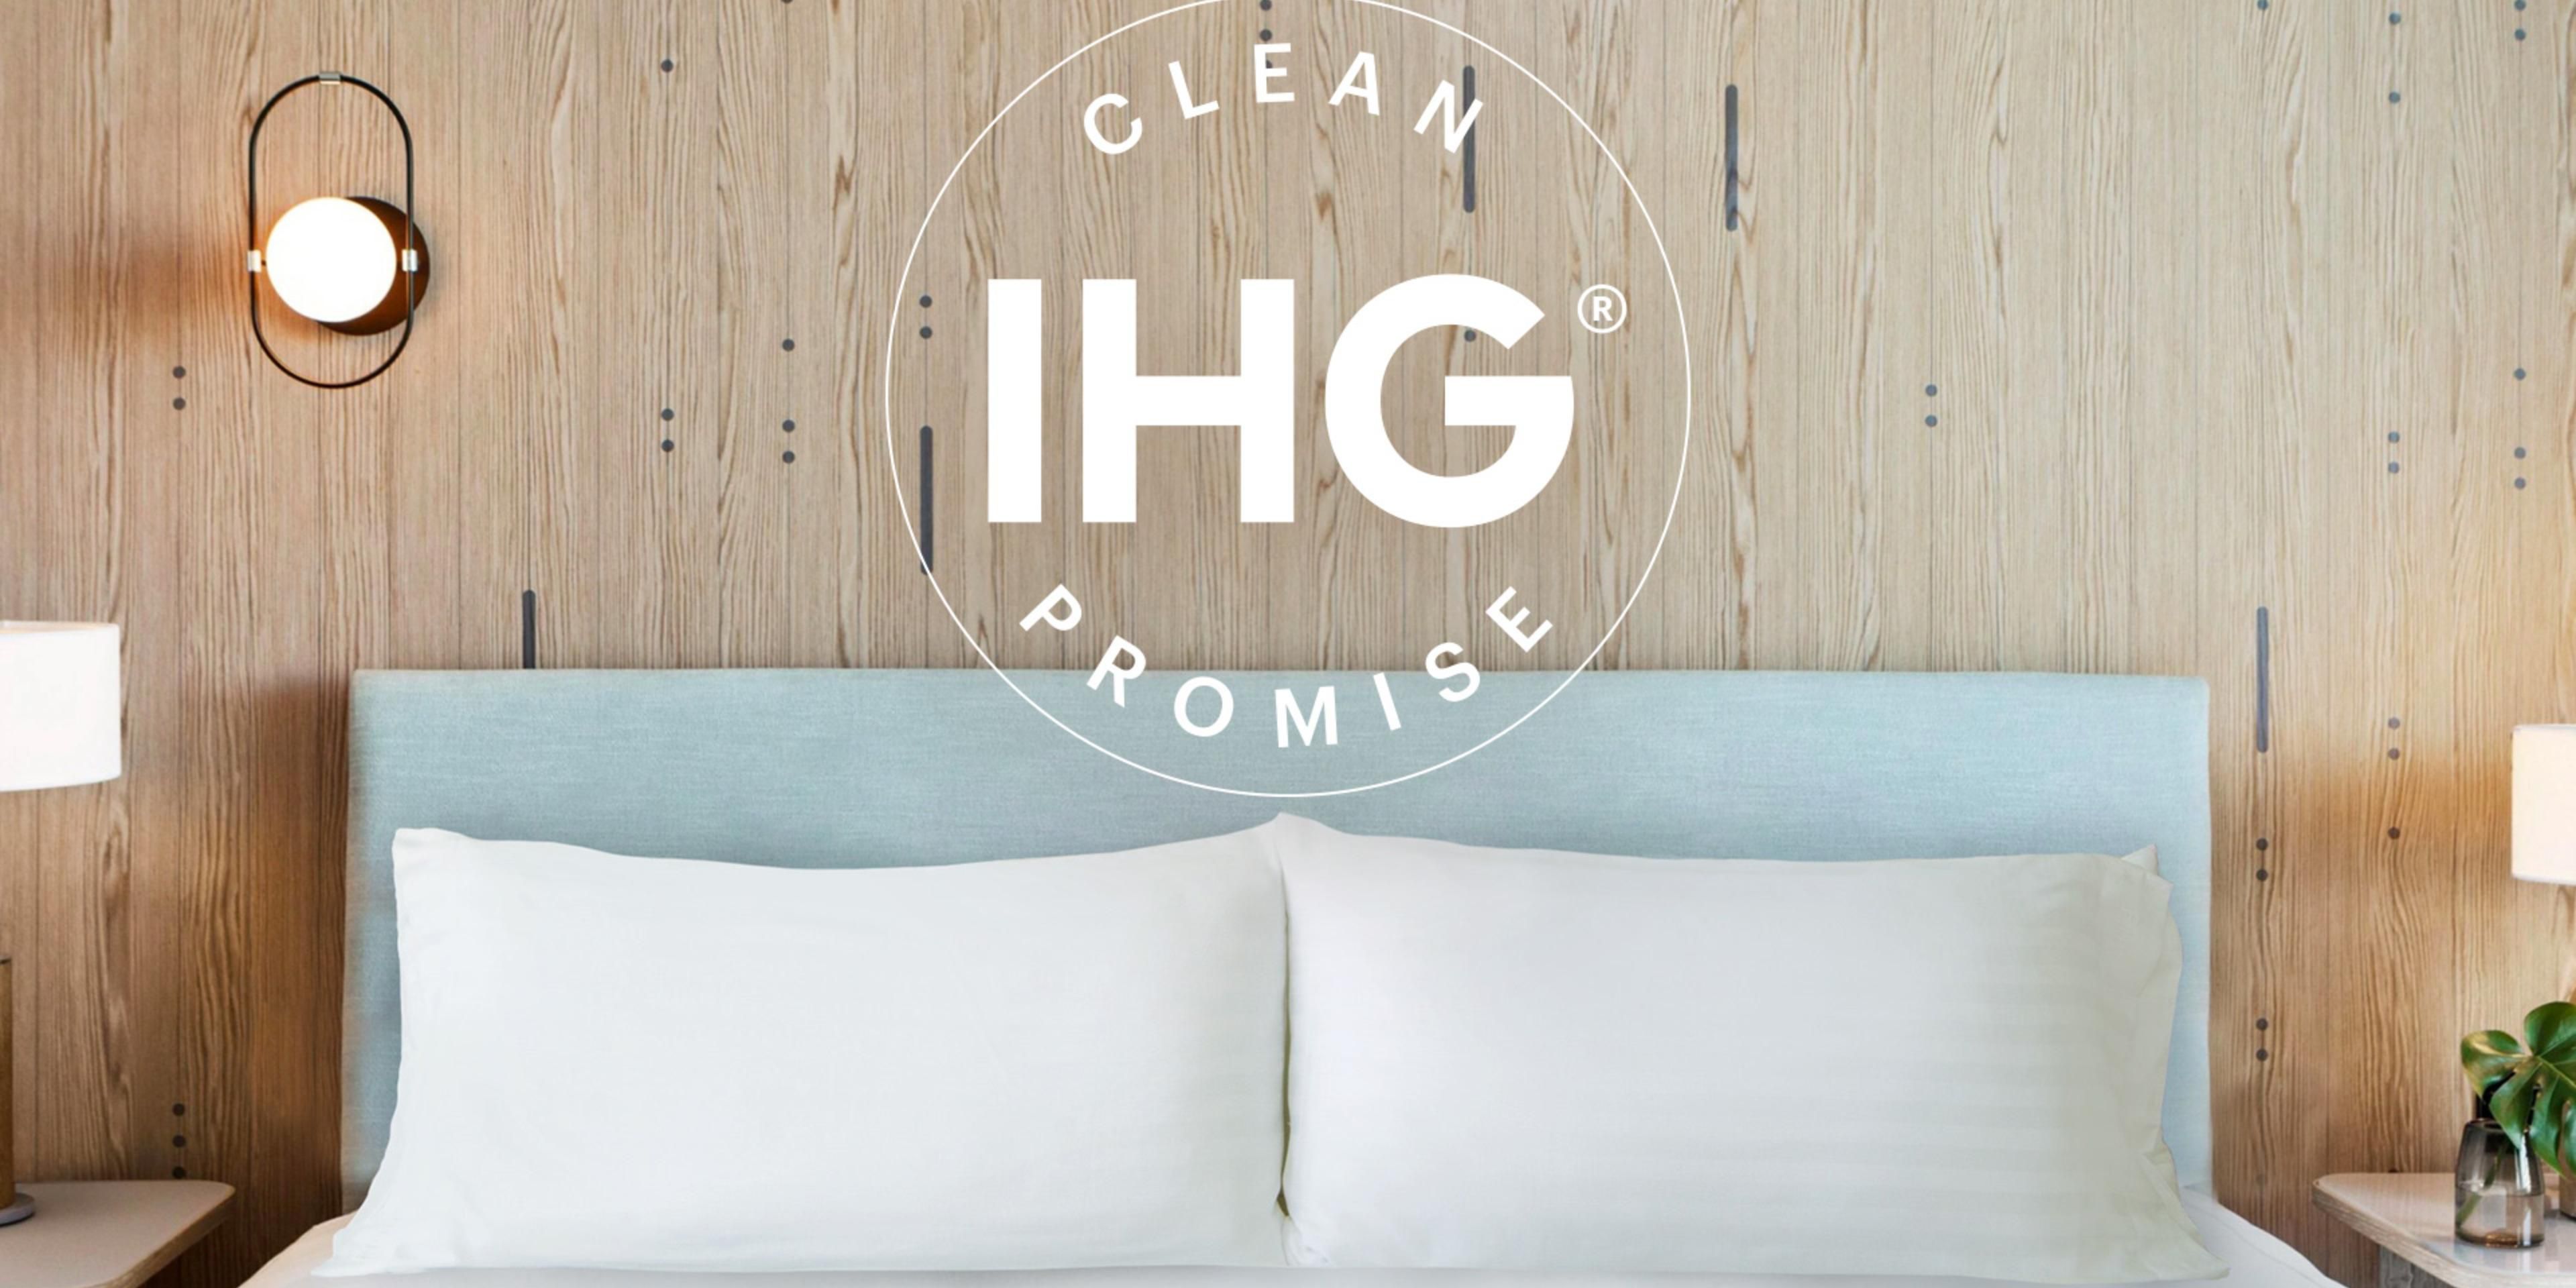 Please know your wellbeing is our top priority, visit IHG Way of Clean to learn more about our commitment to cleanliness. 